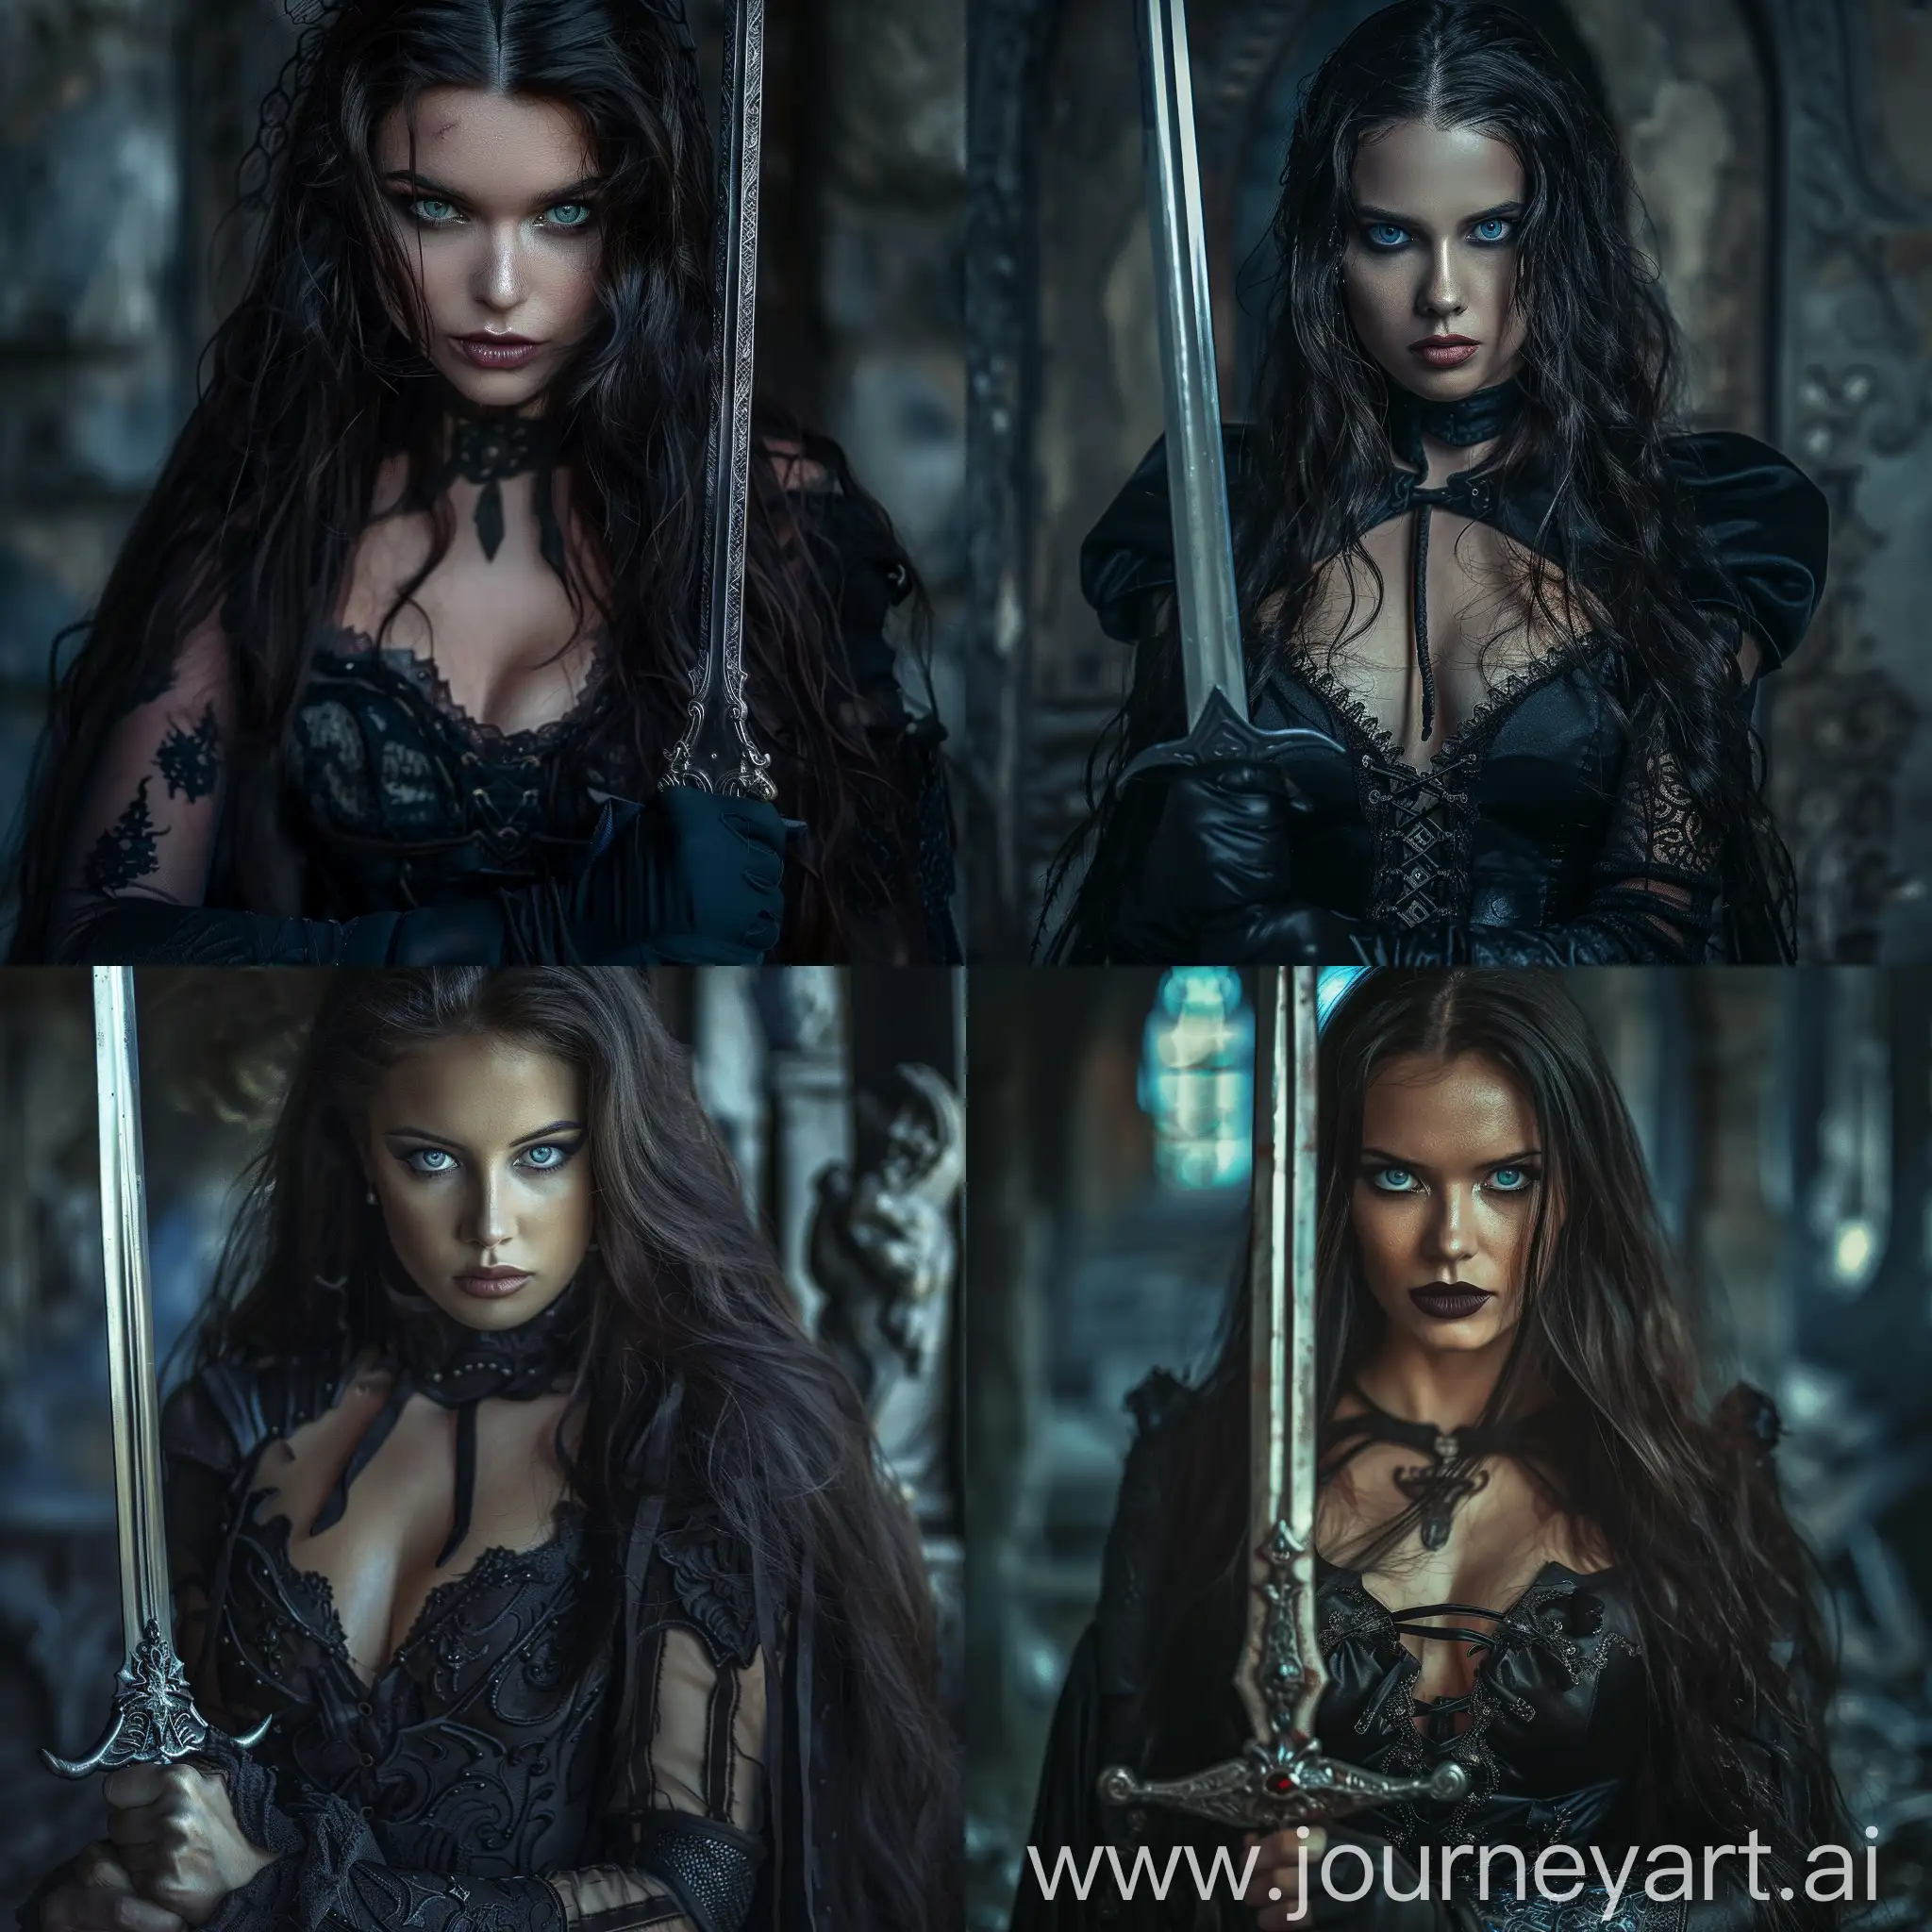 A captivating, ultra-realistic photo of a feminine warrior dressed in dark Gothic-inspired attire, showcasing her lean and muscular build. Her long, dark hair flows elegantly, and her intense blue eyes draw the viewer in. With a bold Gothic makeup look, she wields a sword in one hand, exuding a powerful and seductive aura. The dark fantasy setting, with its gloomy atmosphere, envelops her otherworldly presence, making her the focal point of the image., photo, dark fantasy